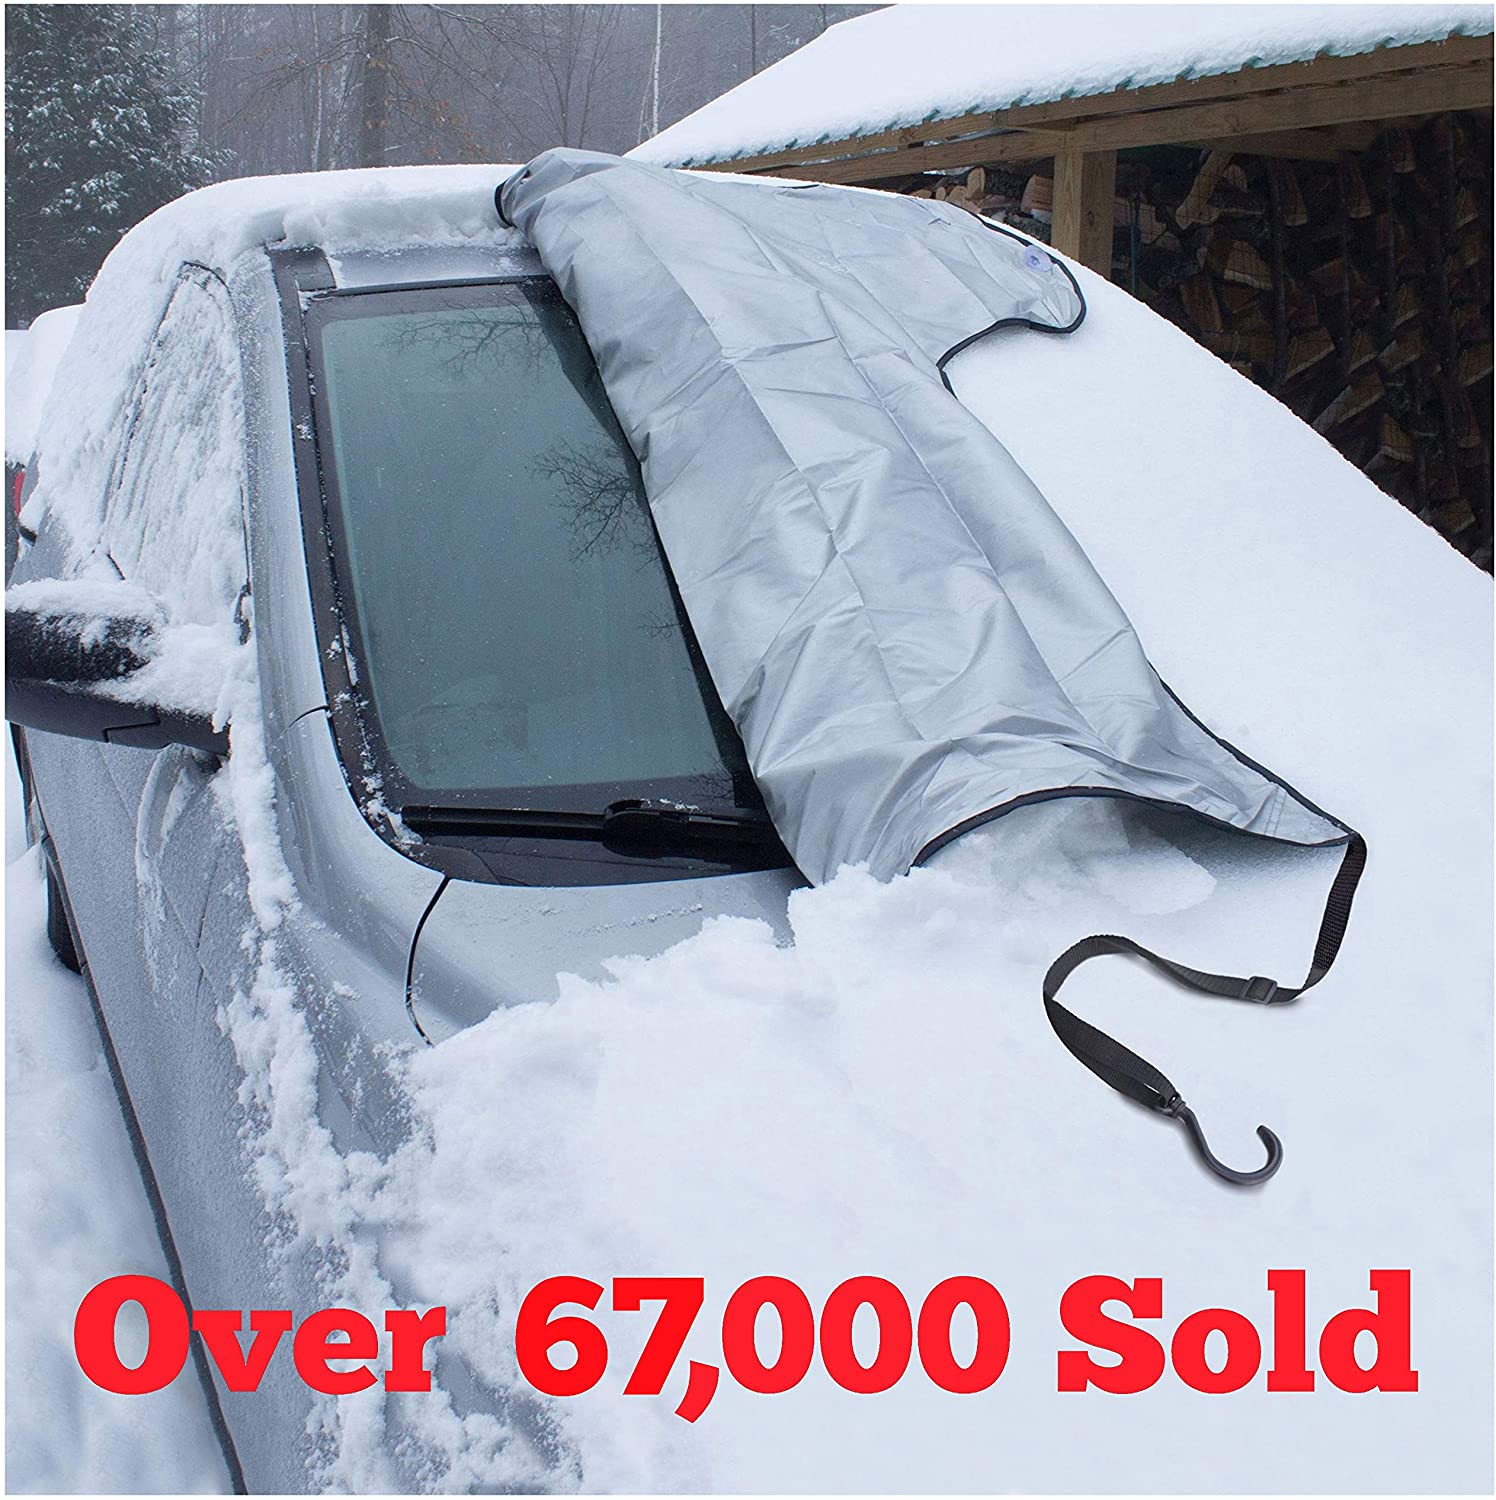 IMIKEYA 2pcs Car Windshield Snow Cover Frost Ice Removal Sun Shade Universal Fit for Cars Auto 